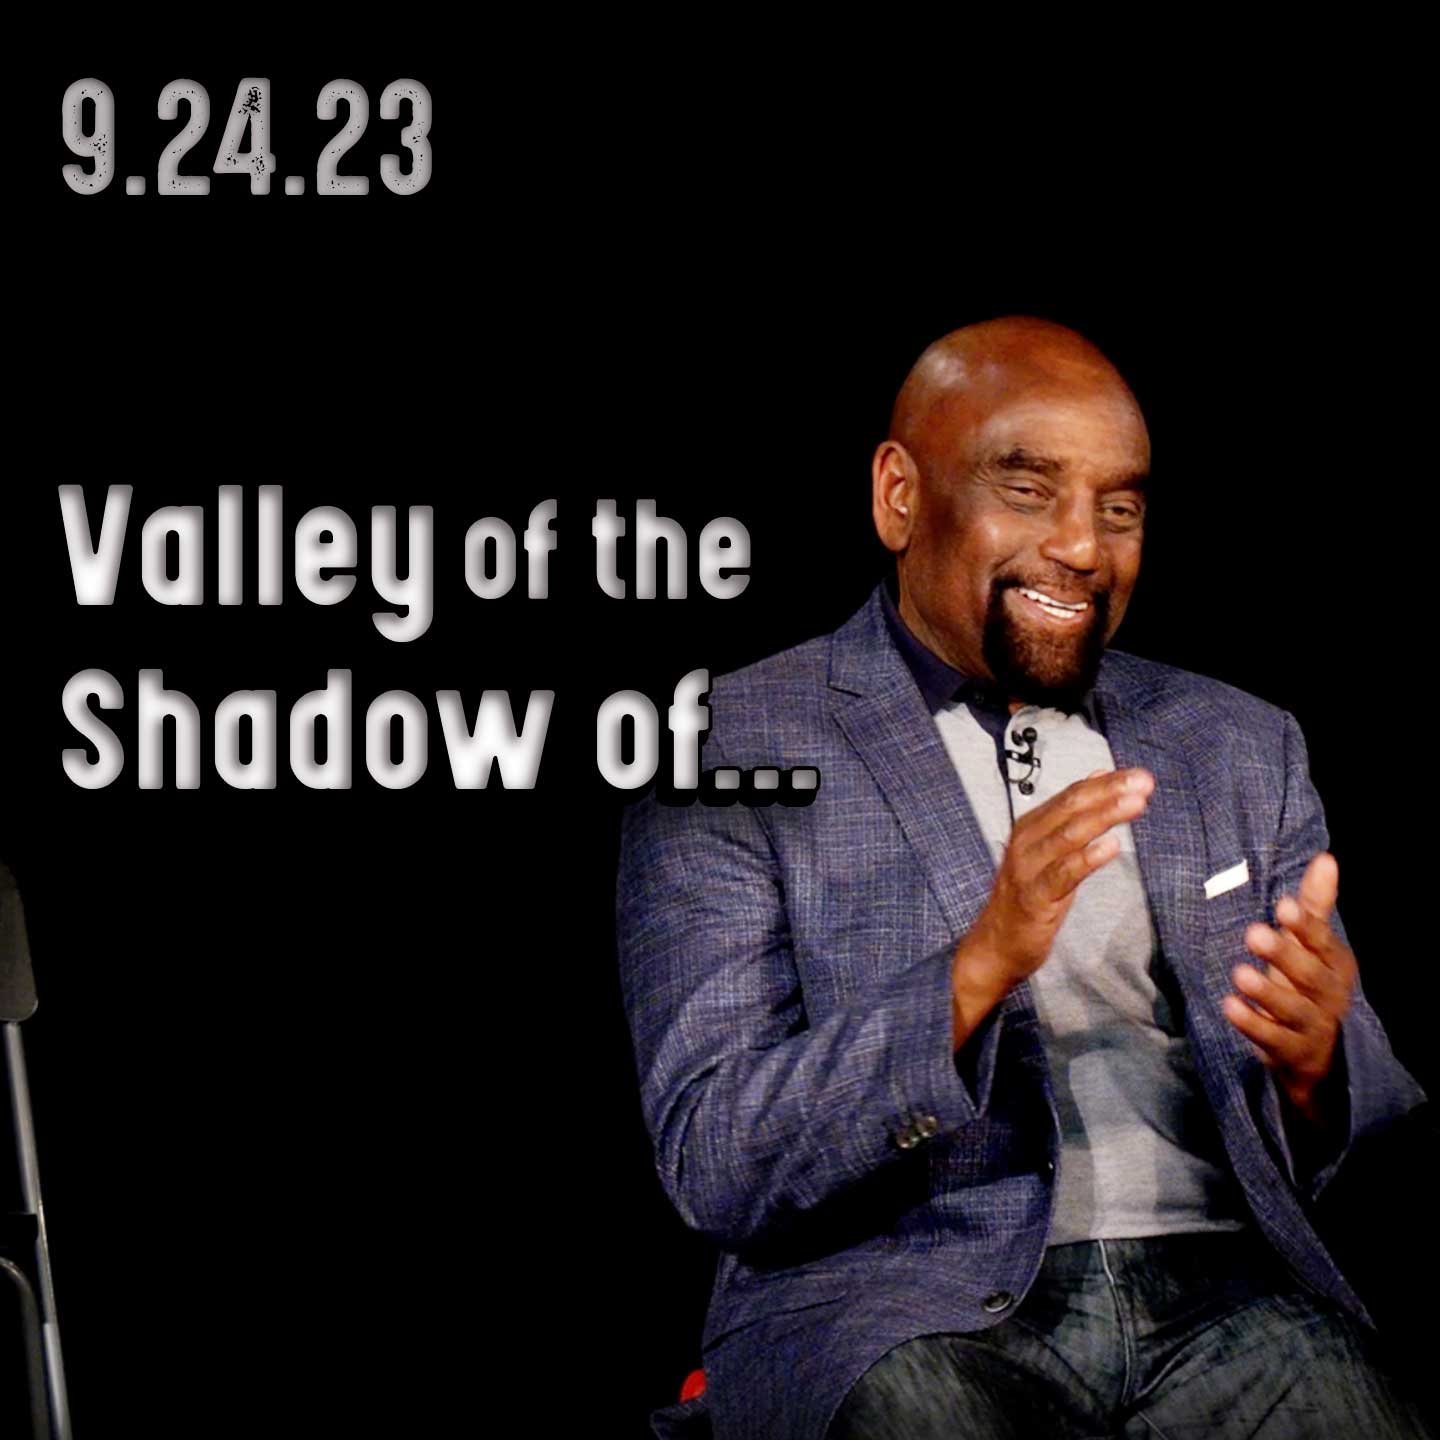 Go Through the Valley of the Shadow of Anger | Church 9/24/23